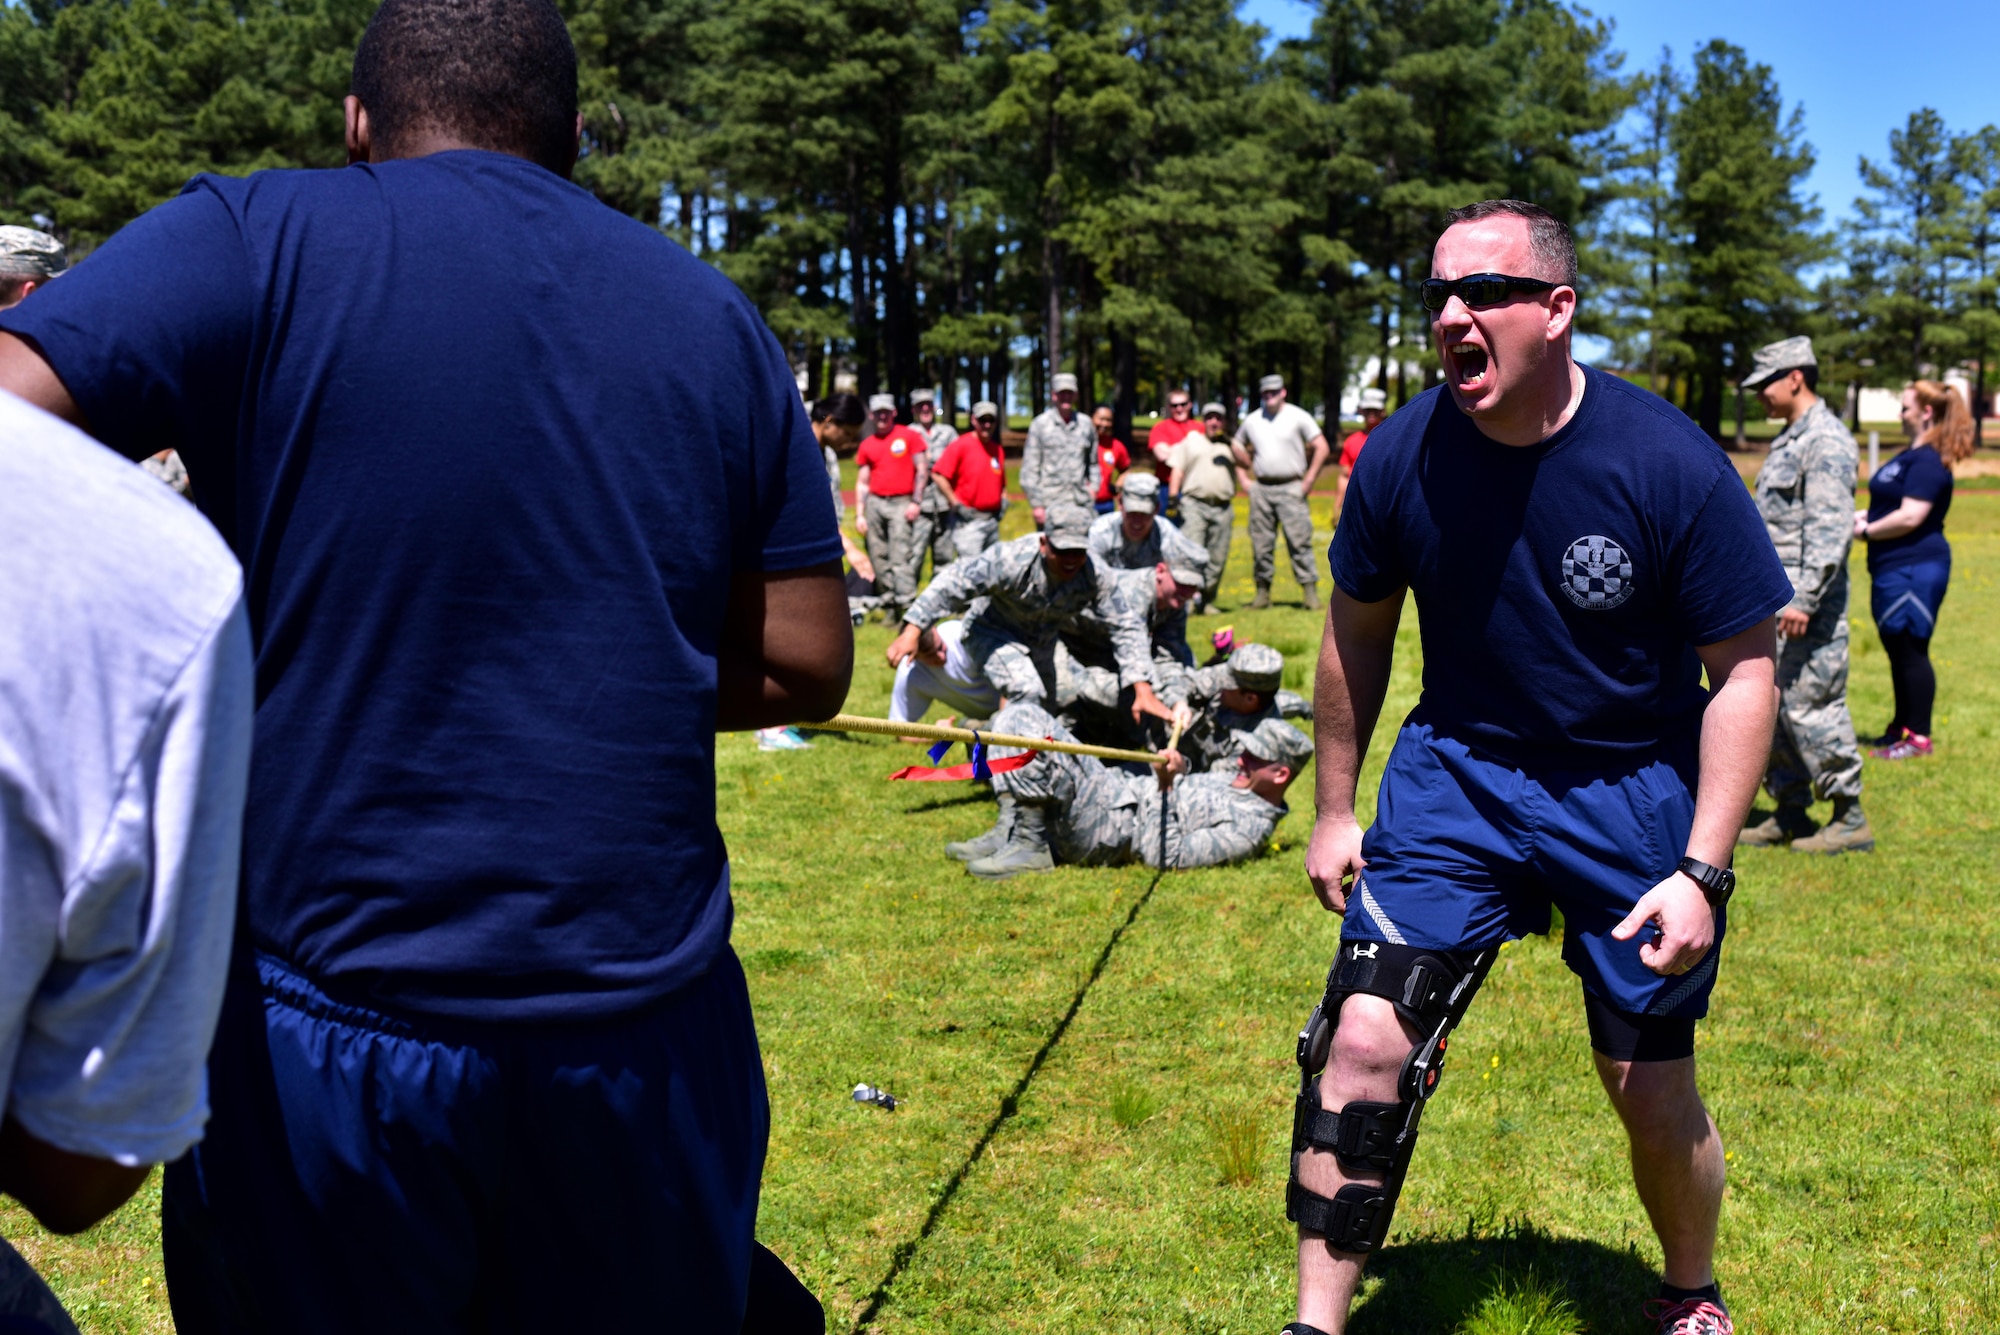 U.S. Air Force Master Sgt. Paul Evans, 19th Security Forces Logistics superintendent, motivates his Defenders in a tug of war contest April 7, 2017 during the Mission Support Group Warrior Ethos Challenge at the track on Little Rock Air Force Base, Ark. The Warrior Ethos Challenge runs through multiple events of strength, endurance, resilence and teamwork and has been an annual MSG event for five years.   
(U.S. Air Force photo by Staff Sgt. Jeremy McGuffin)